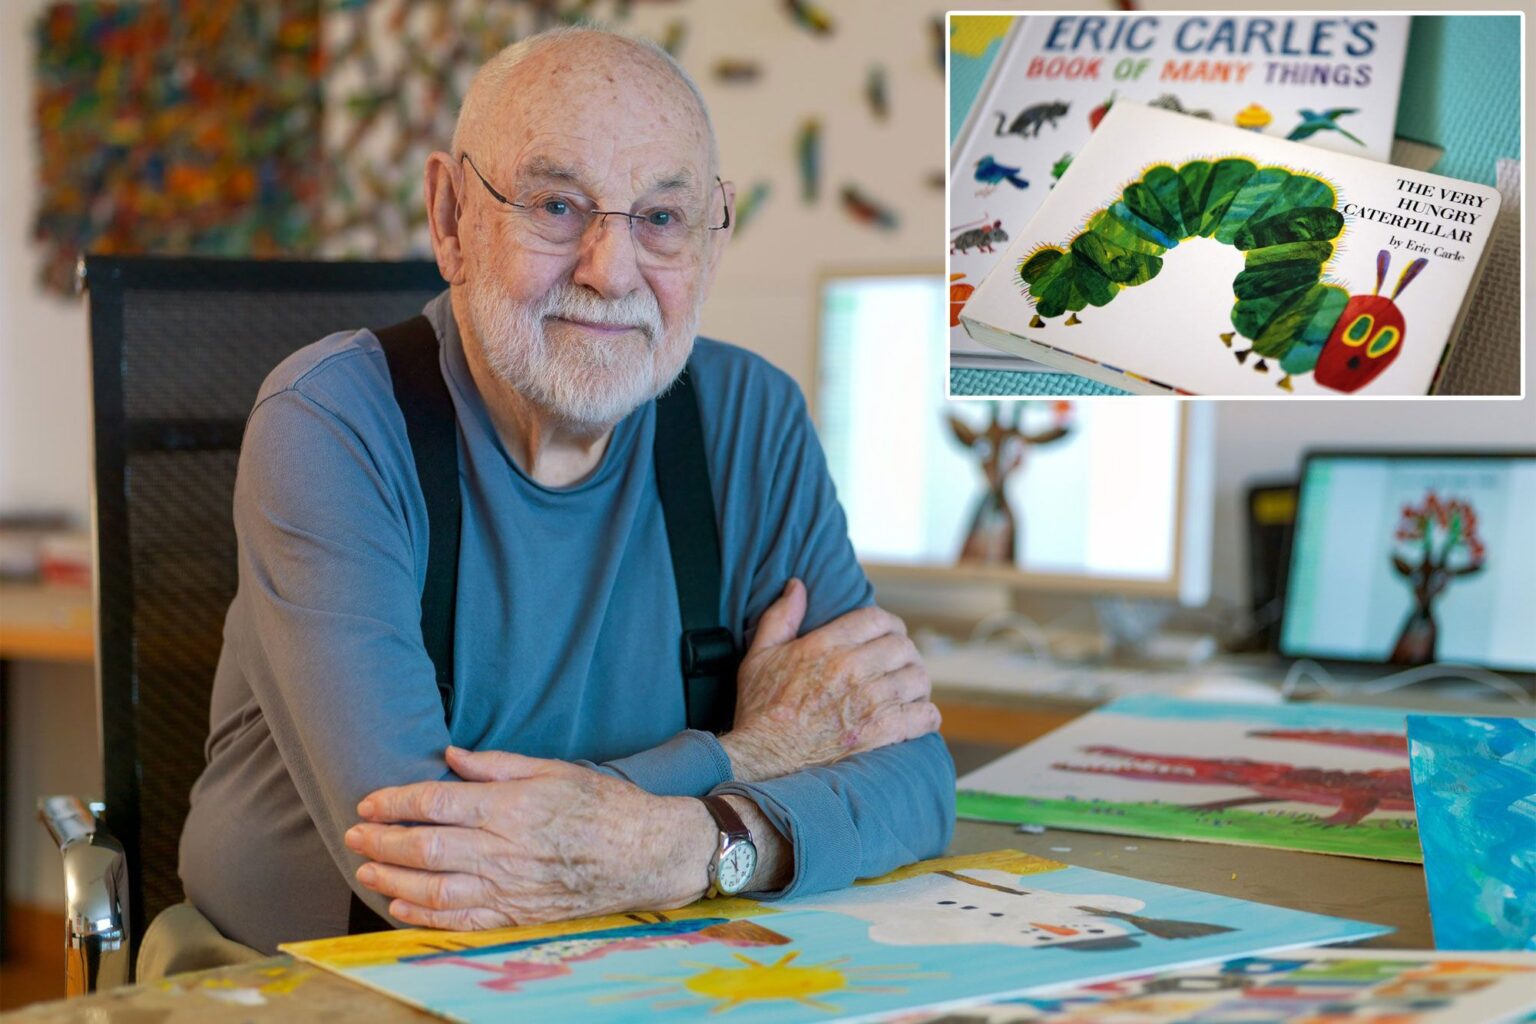 Today we honor the loss of children's author Eric Carle, whose imagination was as bright as his stories. Do you have a favorite from his classics?